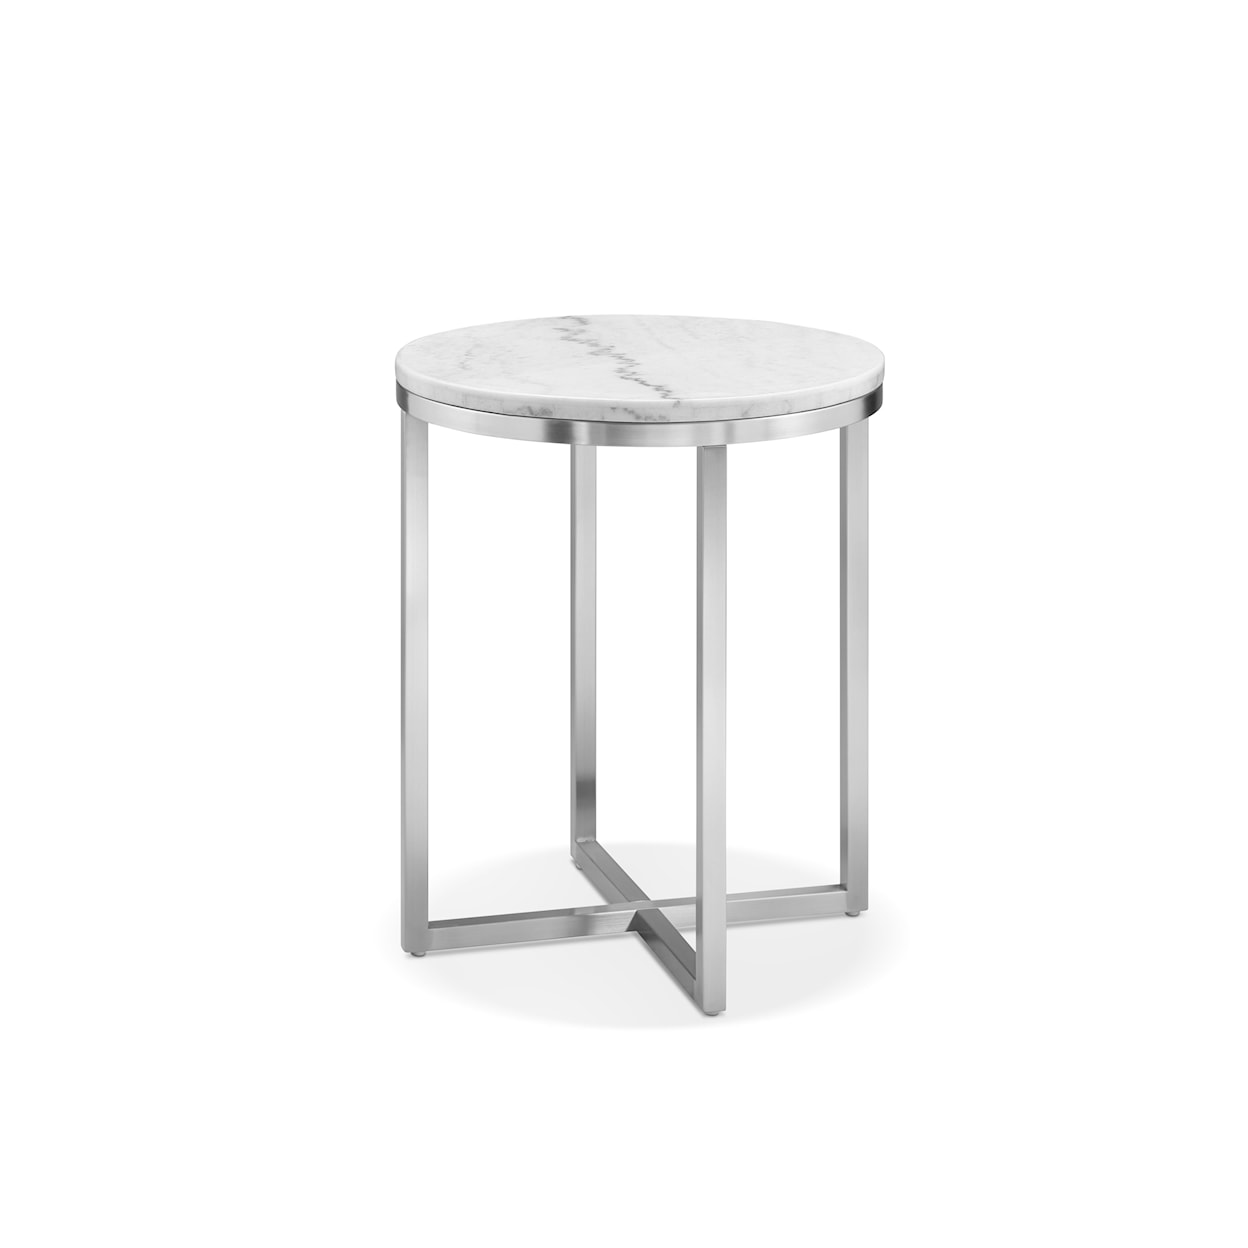 Magnussen Home Esme Occasional Tables Round End Table